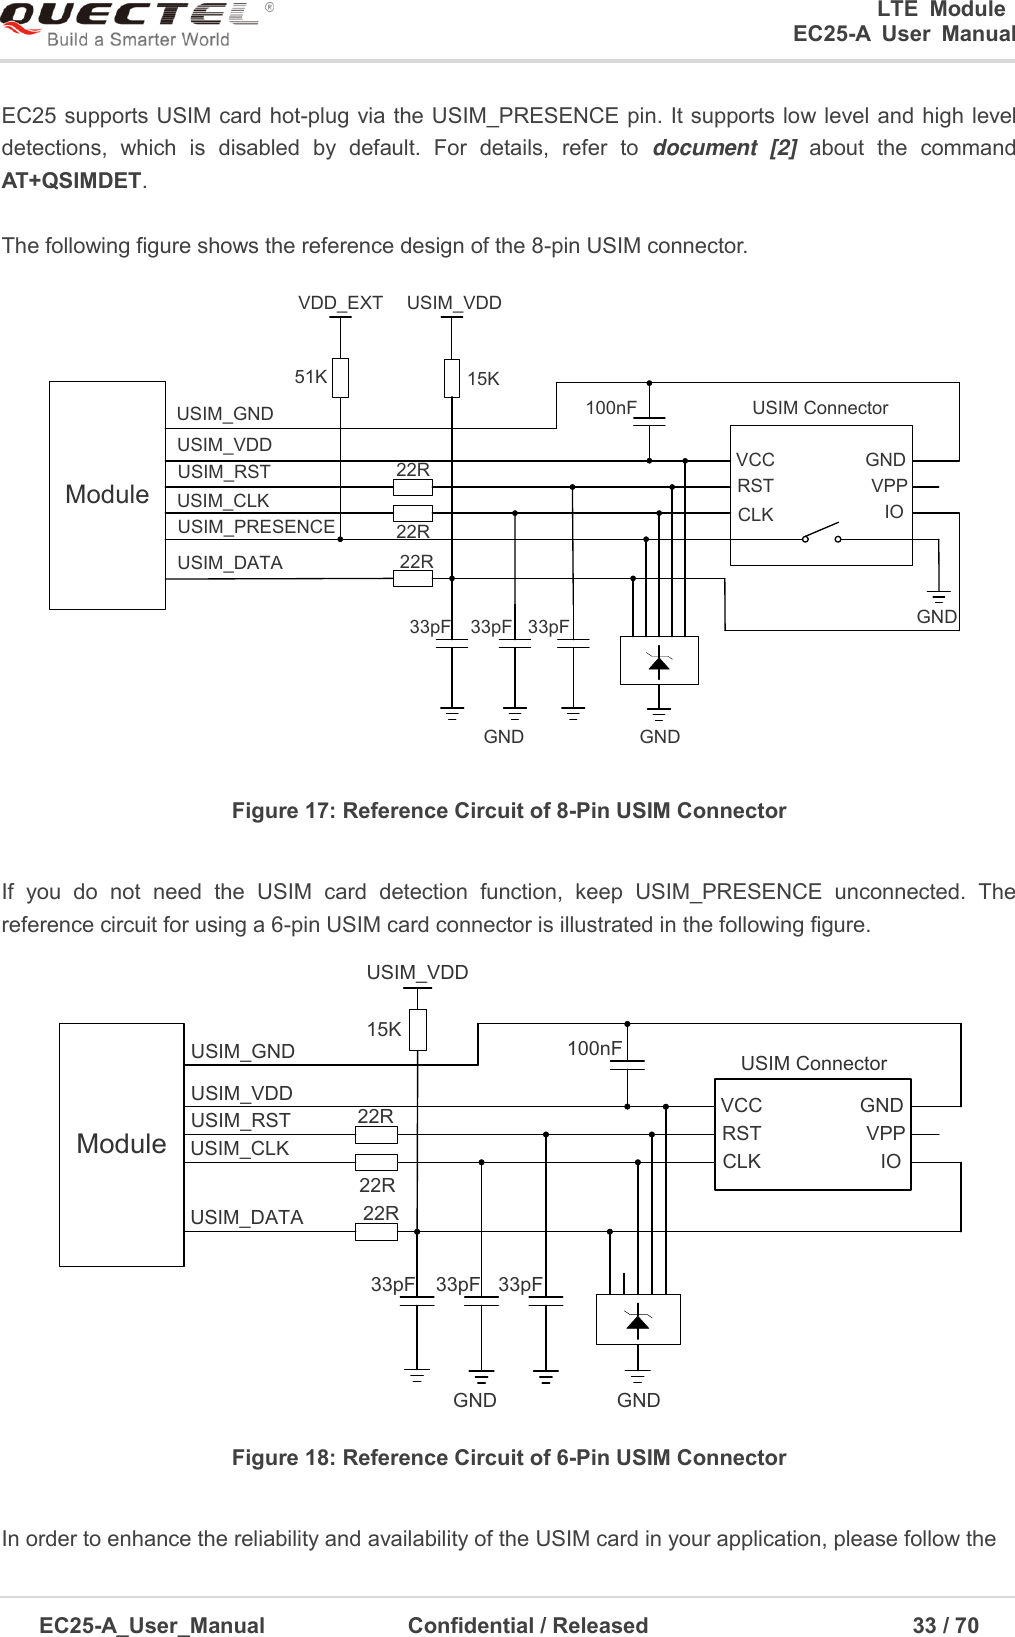 0      LTE  Module      EC25-A  User  Manual EC25-A_User_Manual  Confidential / Released      33 / 7  EC25 supports USIM card hot-plug via the USIM_PRESENCE pin. It supports low level and high level detections,  which  is  disabled  by  default.  For  details,  refer  to  document  [2]  about  the  command AT+QSIMDET.   The following figure shows the reference design of the 8-pin USIM connector. ModuleUSIM_VDDUSIM_GNDUSIM_RSTUSIM_CLKUSIM_DATAUSIM_PRESENCE22R22R22RVDD_EXT51K100nF USIM ConnectorGNDGND33pF 33pF 33pFVCCRSTCLK IOVPPGNDGNDUSIM_VDD15KFigure 17: Reference Circuit of 8-Pin USIM Connector If  you  do  not  need  the  USIM  card  detection  function,  keep  USIM_PRESENCE  unconnected.  The reference circuit for using a 6-pin USIM card connector is illustrated in the following figure.   ModuleUSIM_VDDUSIM_GNDUSIM_RSTUSIM_CLKUSIM_DATA 22R22R22R100nF USIM ConnectorGND33pF 33pF 33pFVCCRSTCLK IOVPPGNDGND15KUSIM_VDDFigure 18: Reference Circuit of 6-Pin USIM Connector In order to enhance the reliability and availability of the USIM card in your application, please follow the 